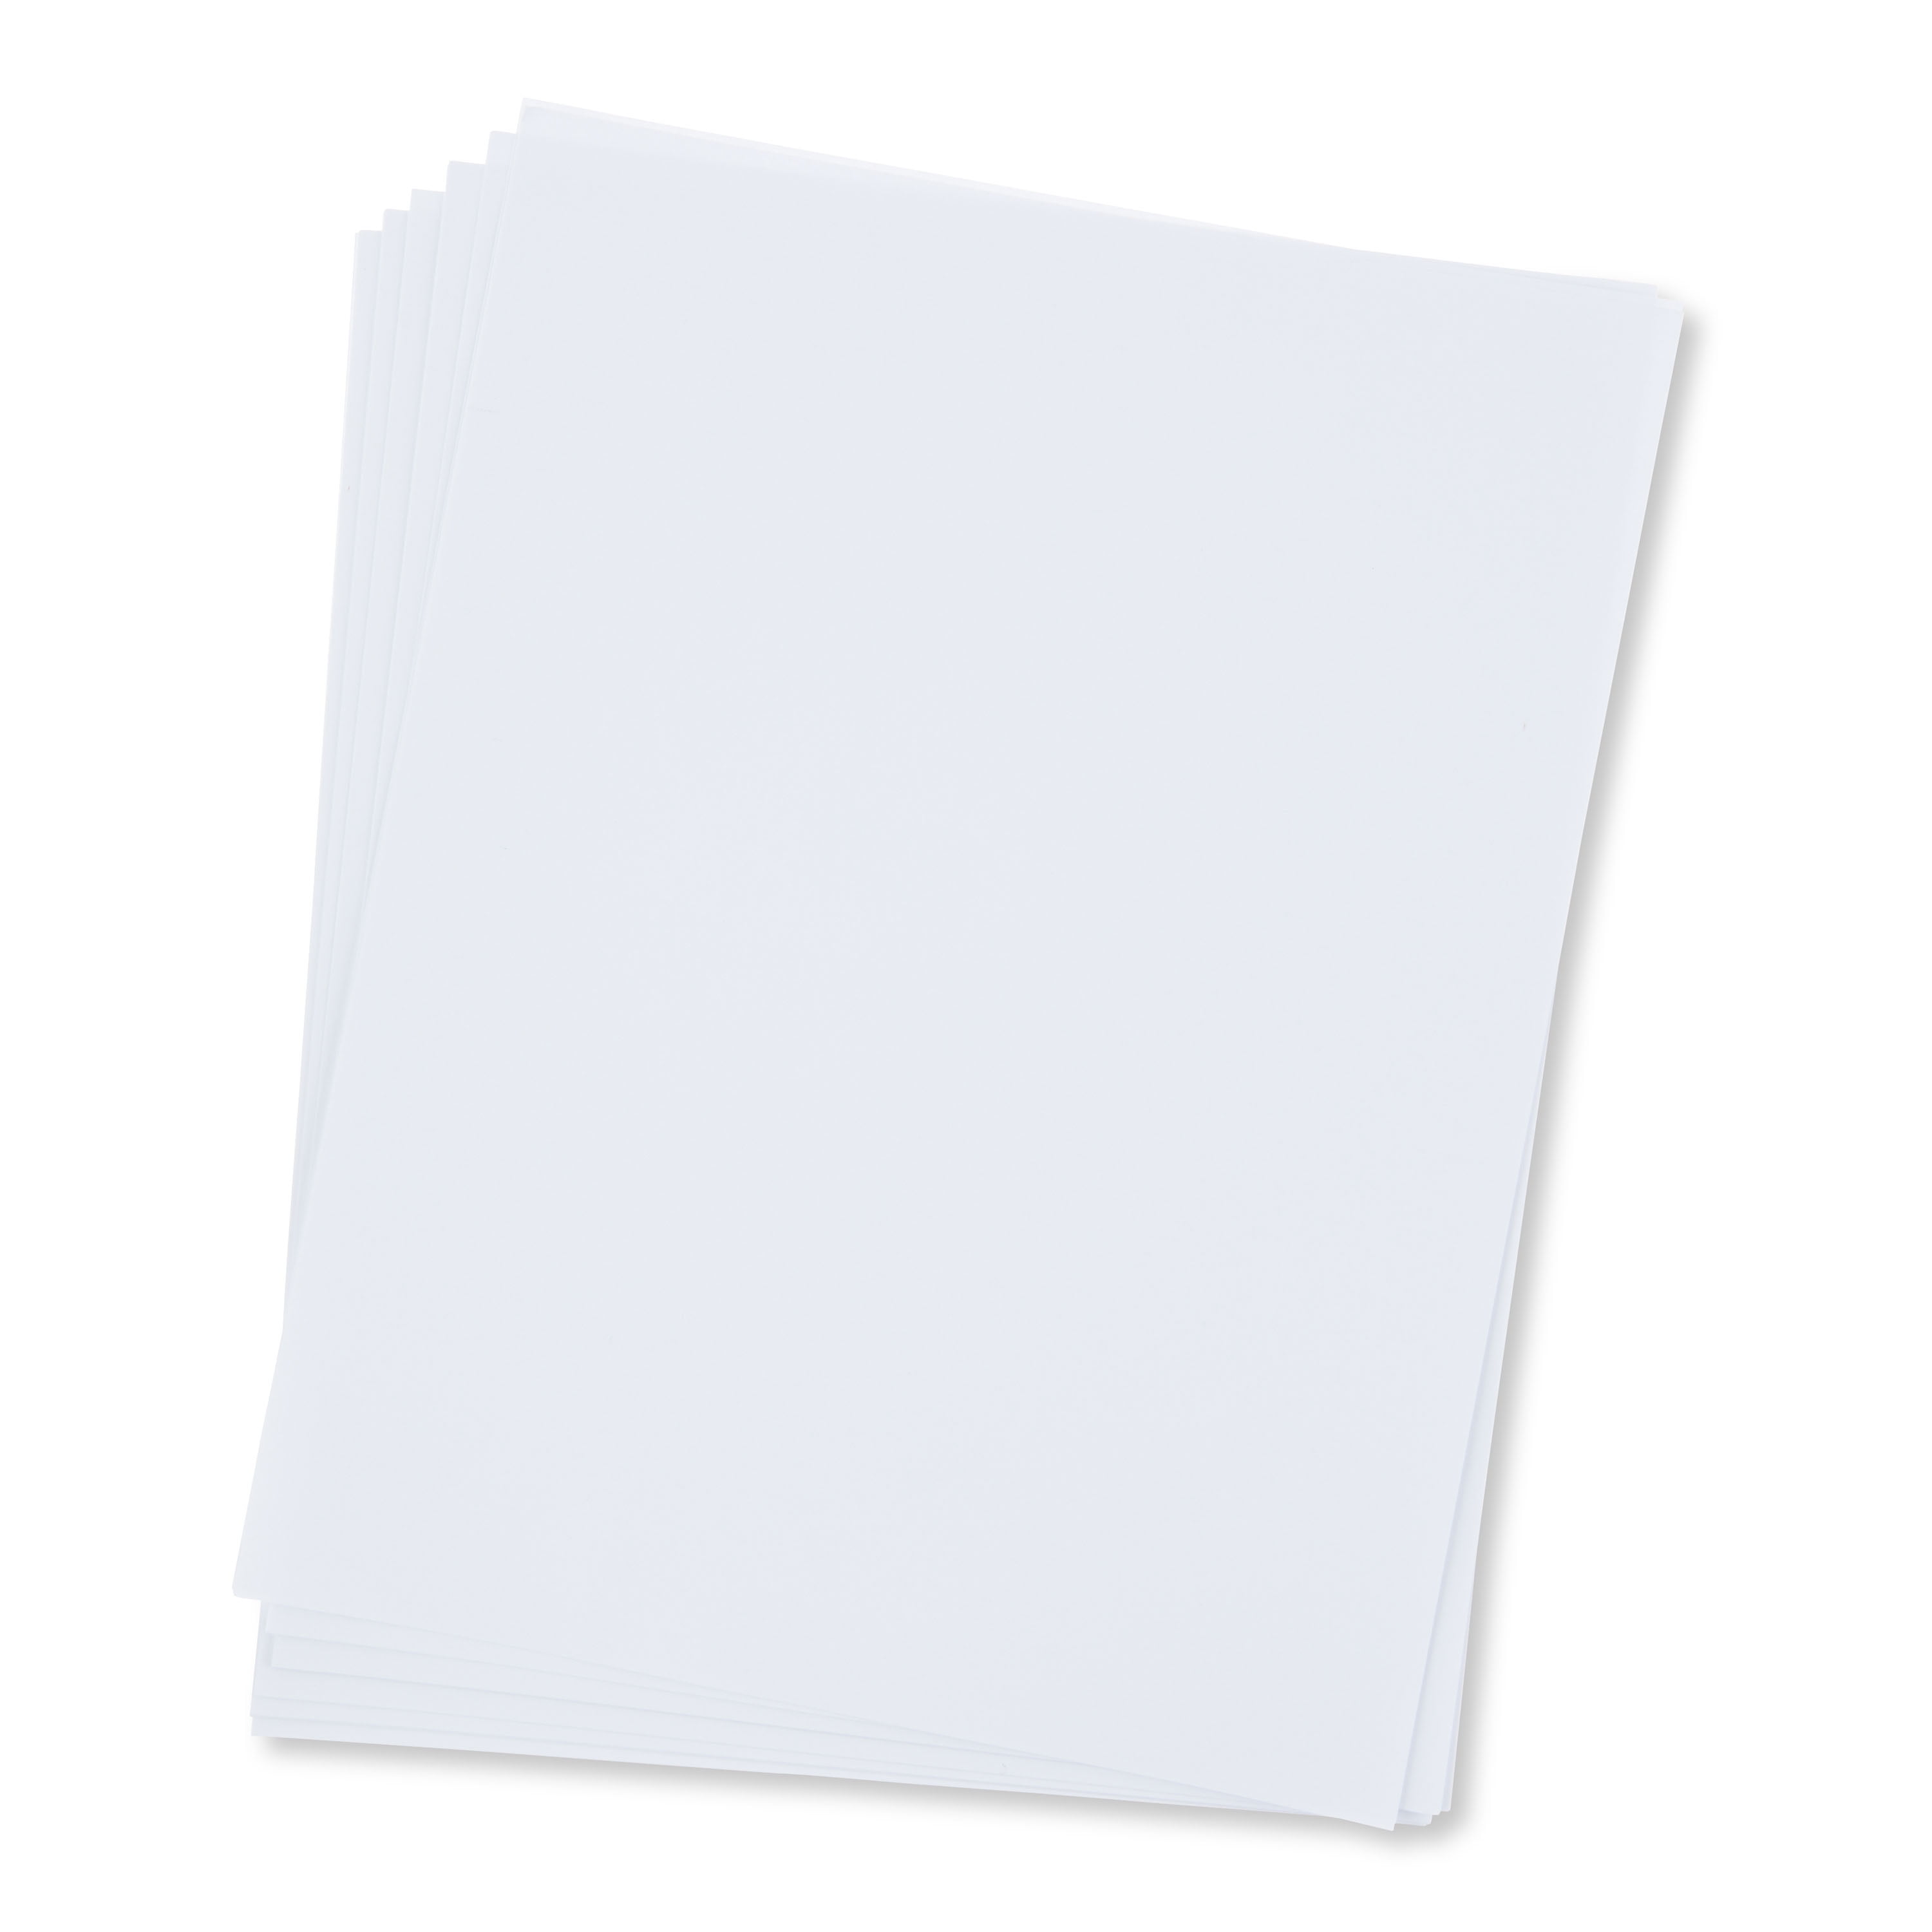 Grand & Toy Premium Copy Paper, Letter Size (8-1/2 x 11), 20 lb., White,  1-Pack of 500 Sheets